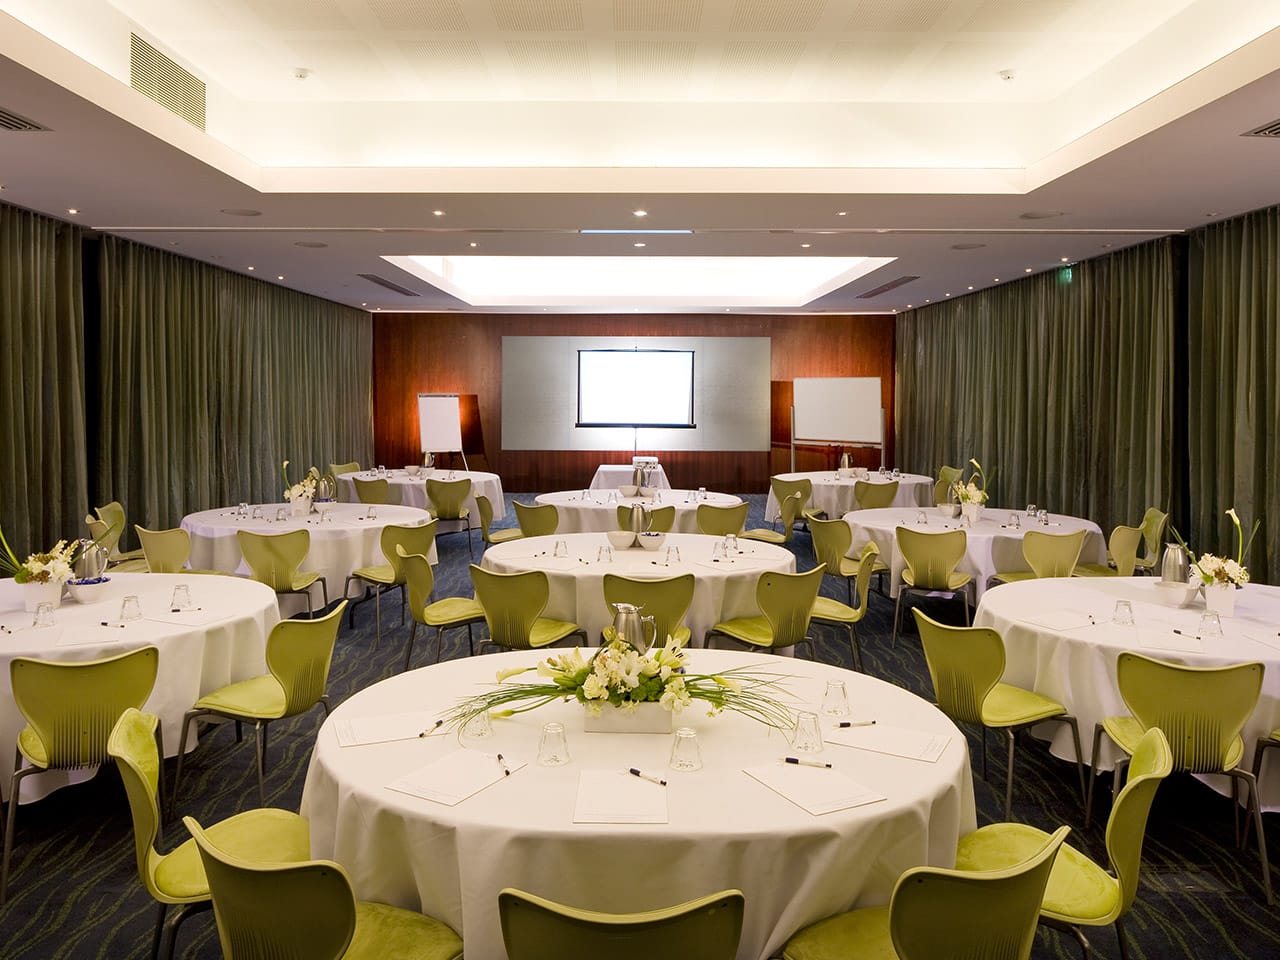 A Meeting Room With Round Tables, Green Chairs And A Tv at The Front Of The Room.